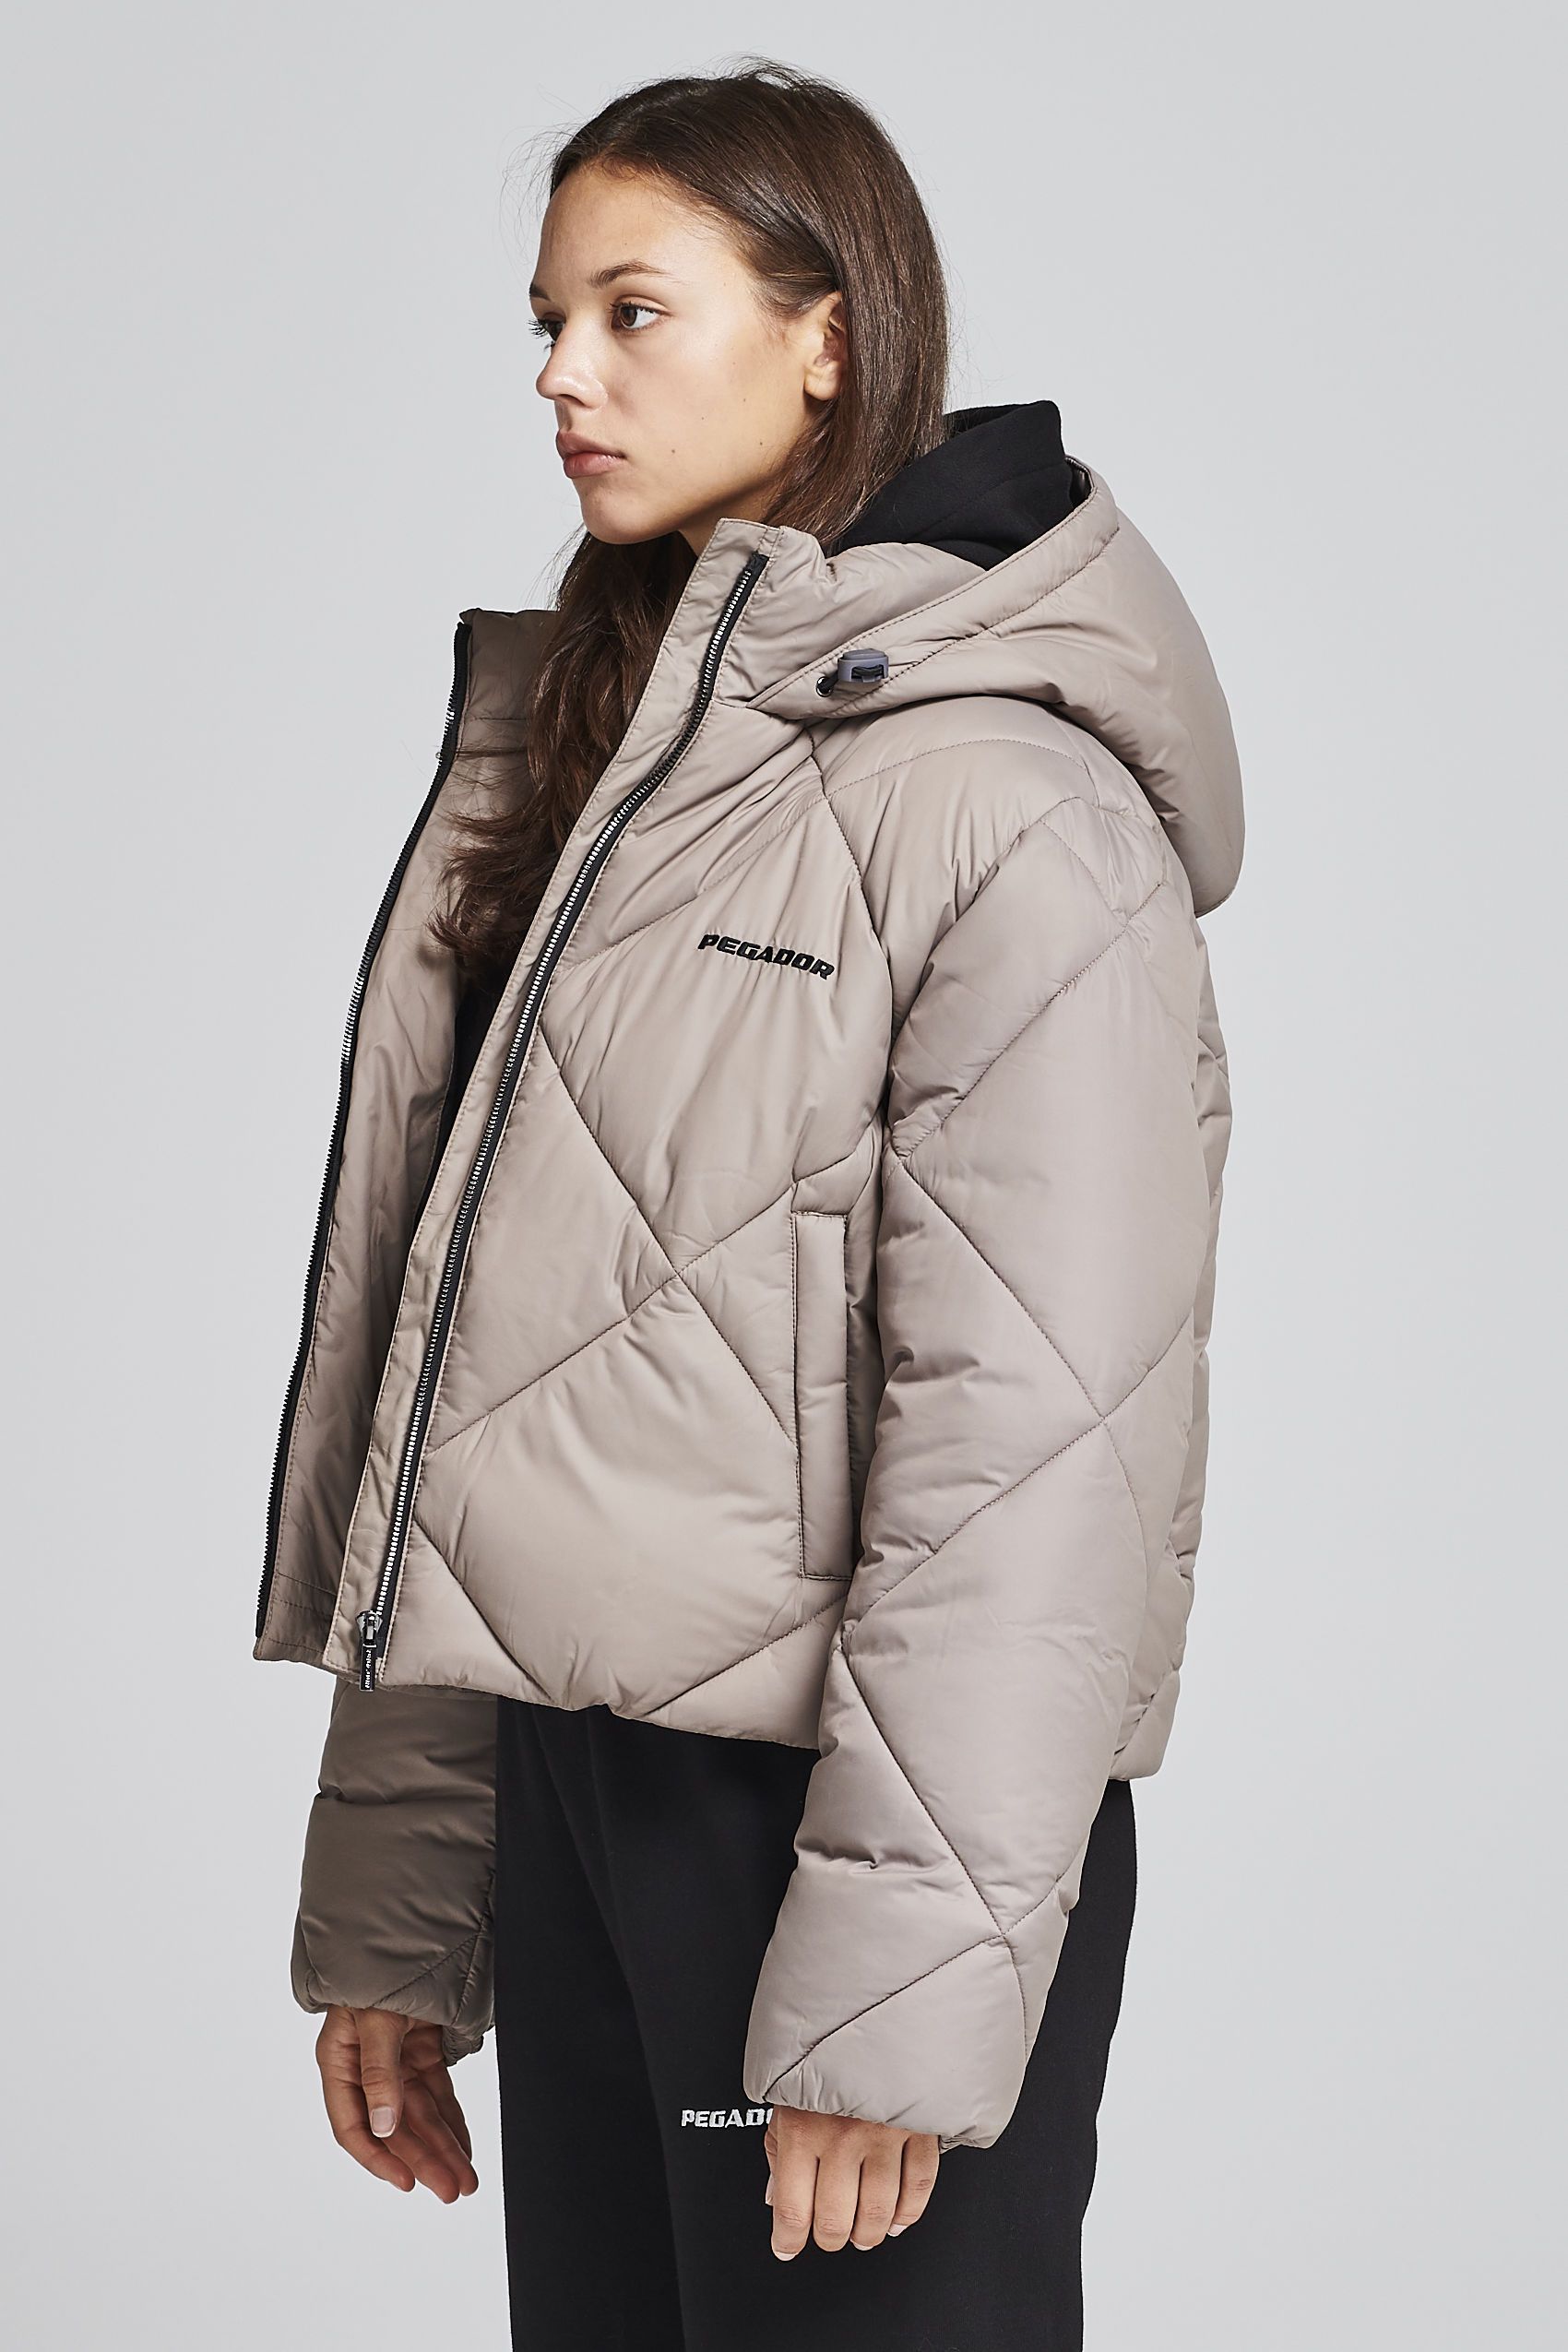 Pegador Pgdr-1195-001 MADISON HOODED PUFFER JACKET Taupe3